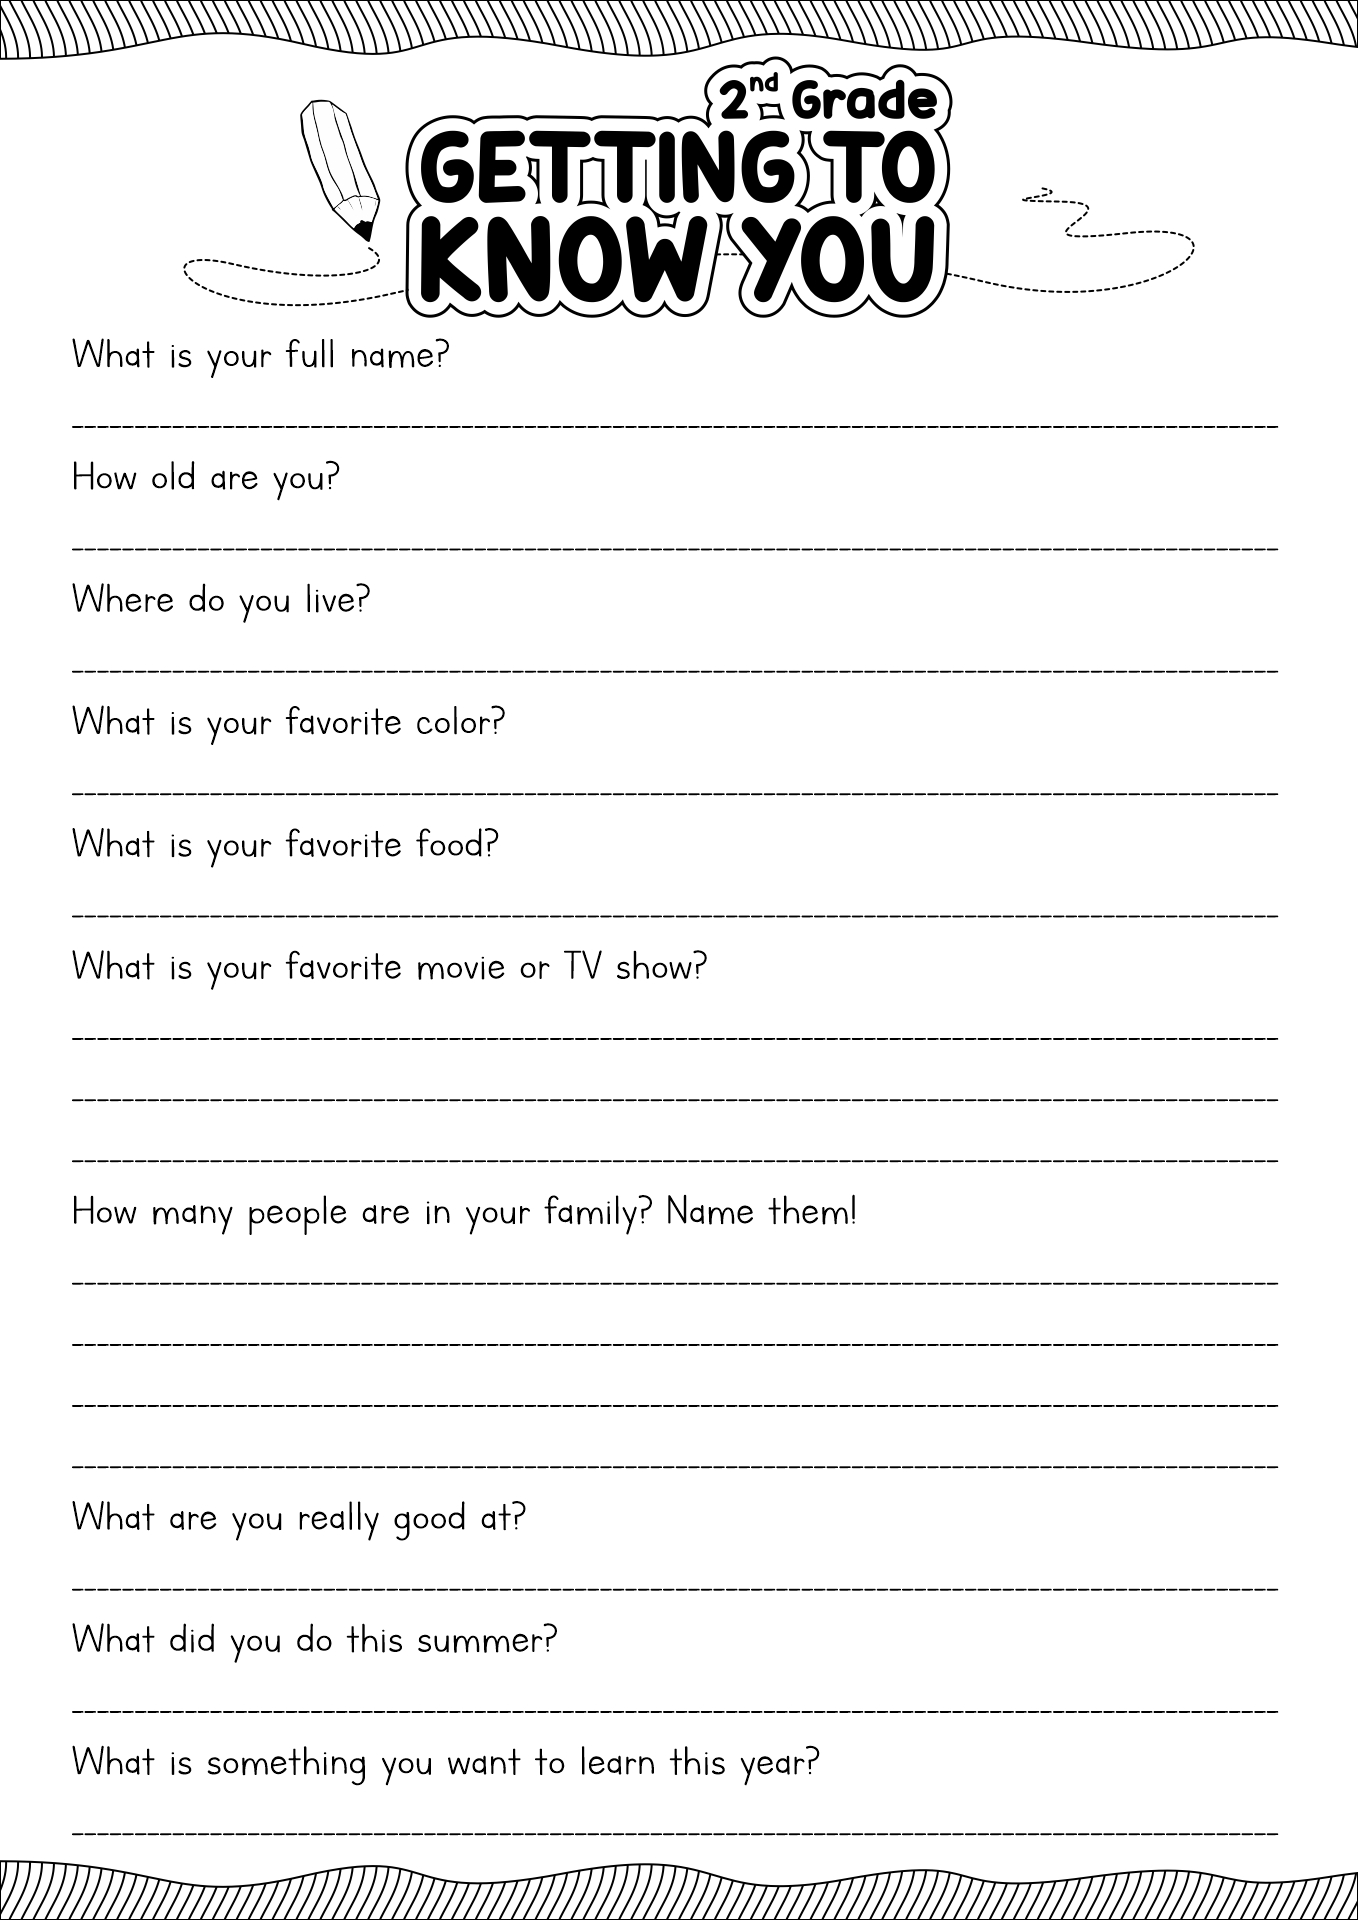 13-best-images-of-get-to-know-me-worksheet-get-to-know-you-worksheet-getting-to-know-me